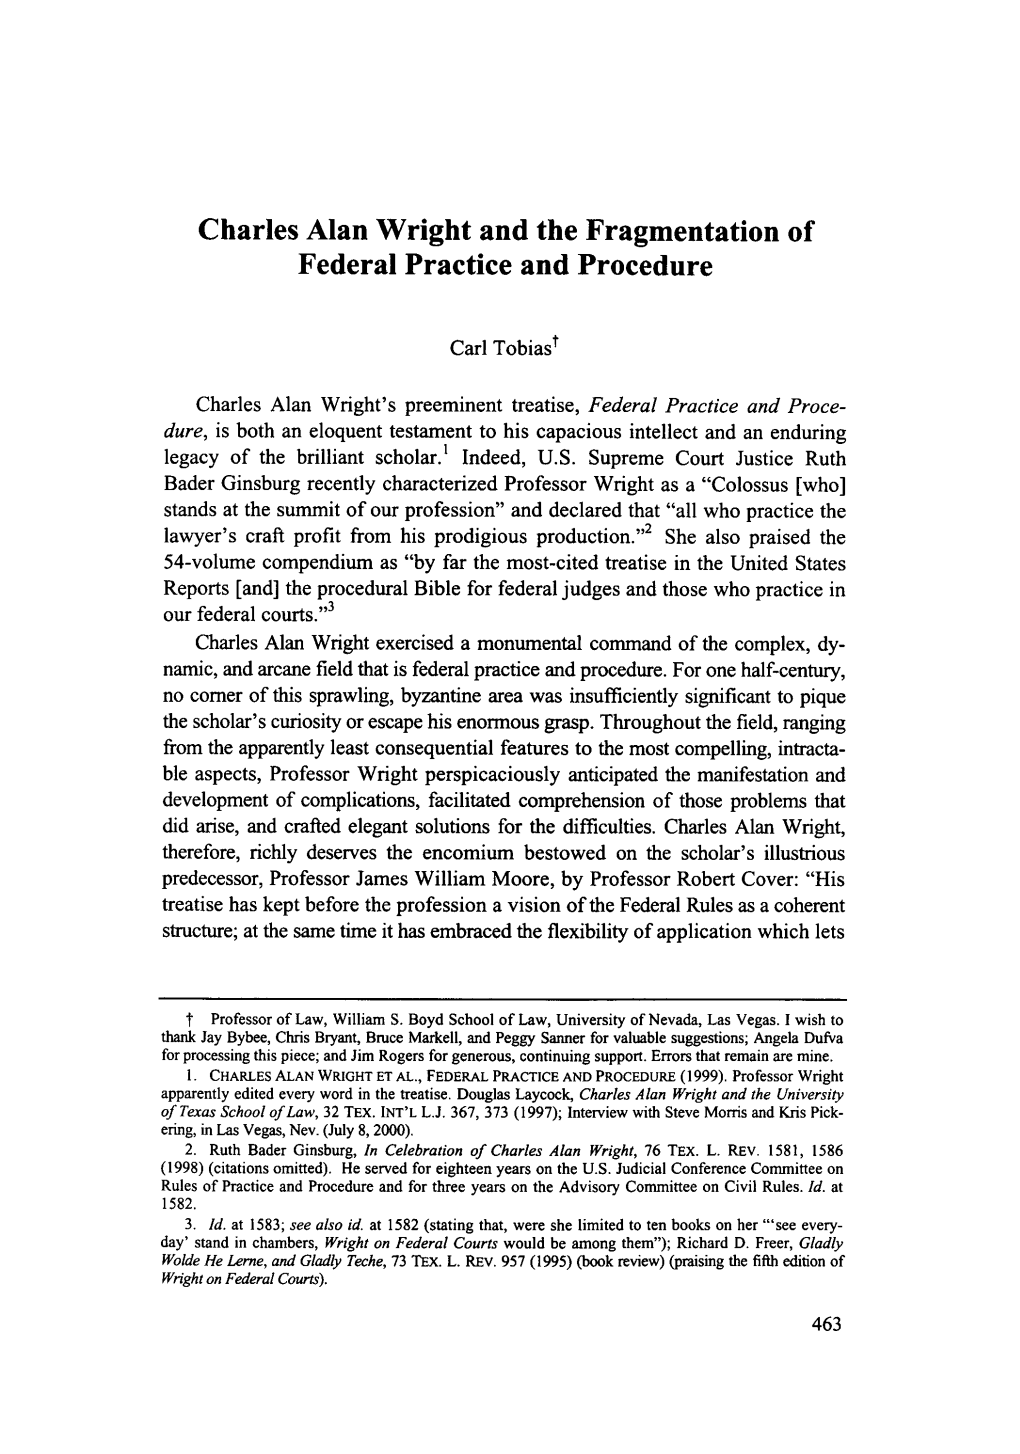 Charles Alan Wright and the Fragmentation of Federal Practice and Procedure